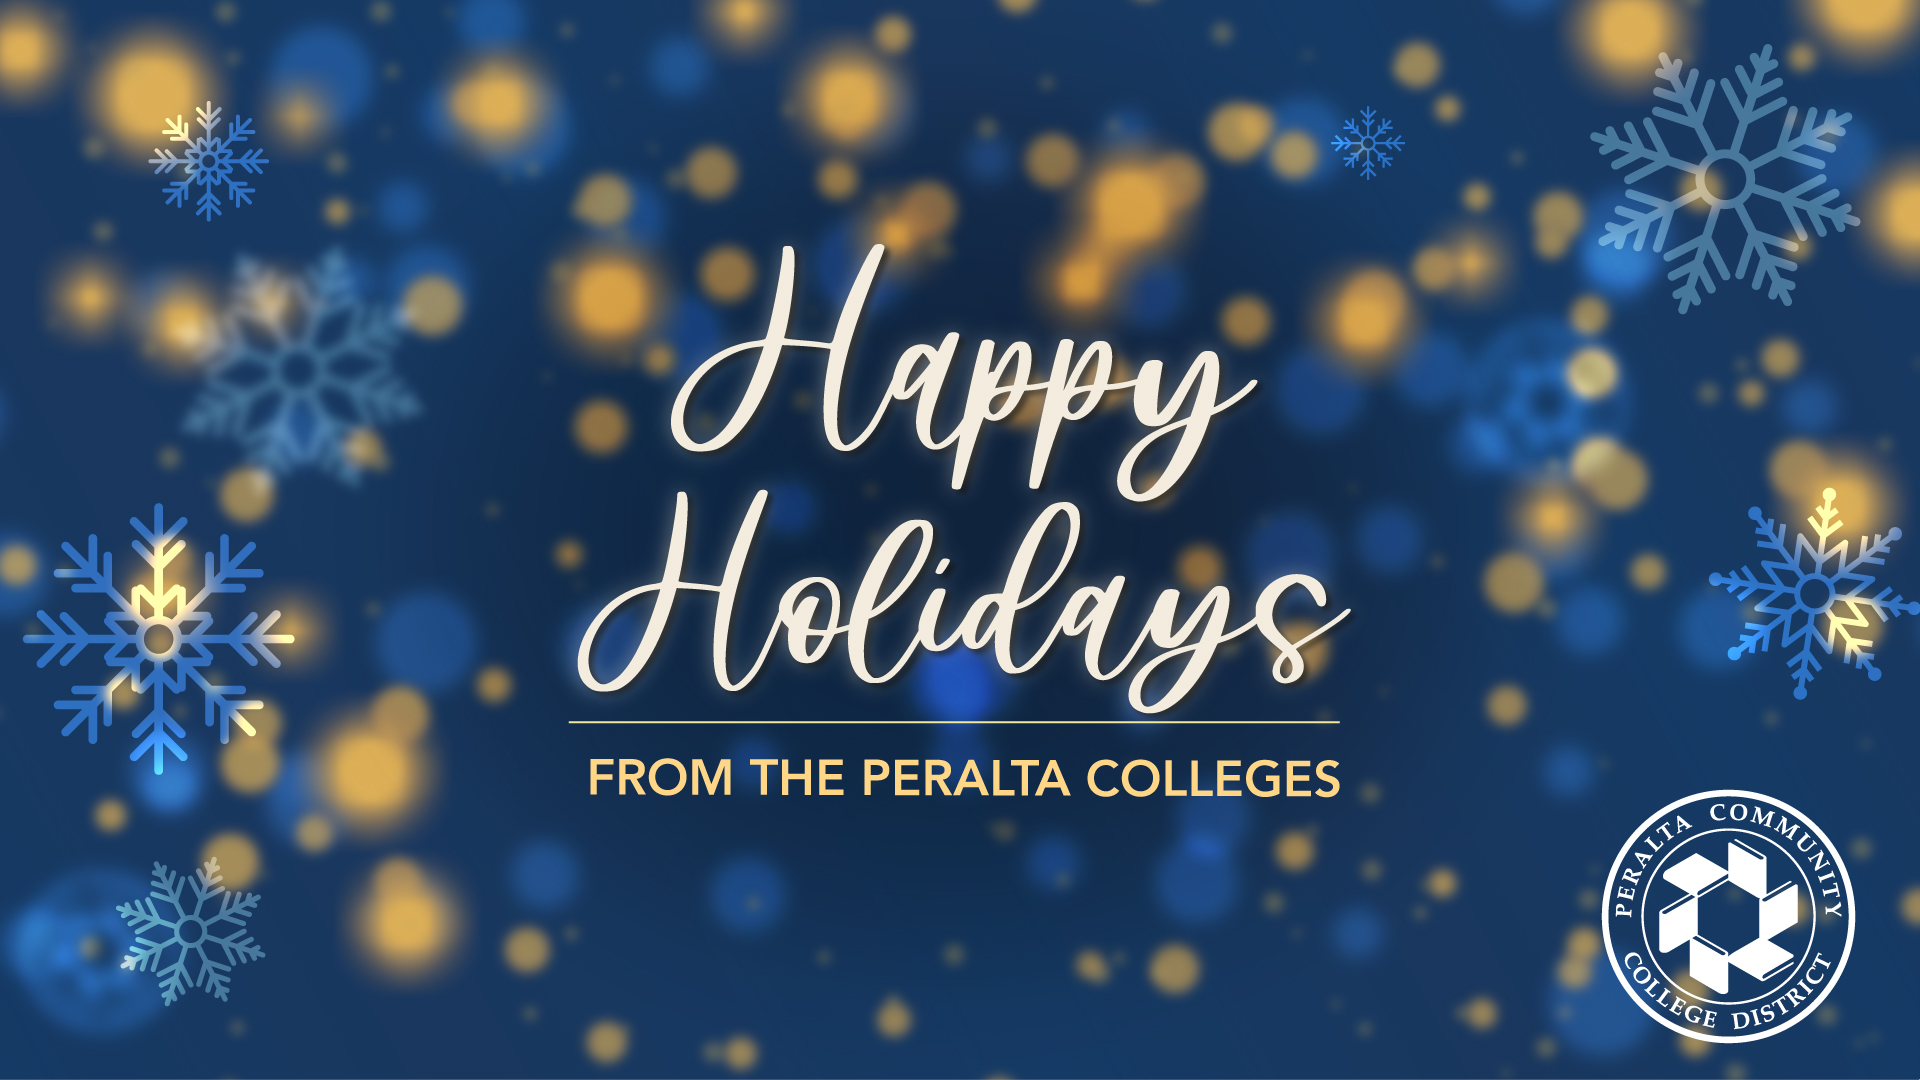 Happy Holidays from the Peralta Colleges